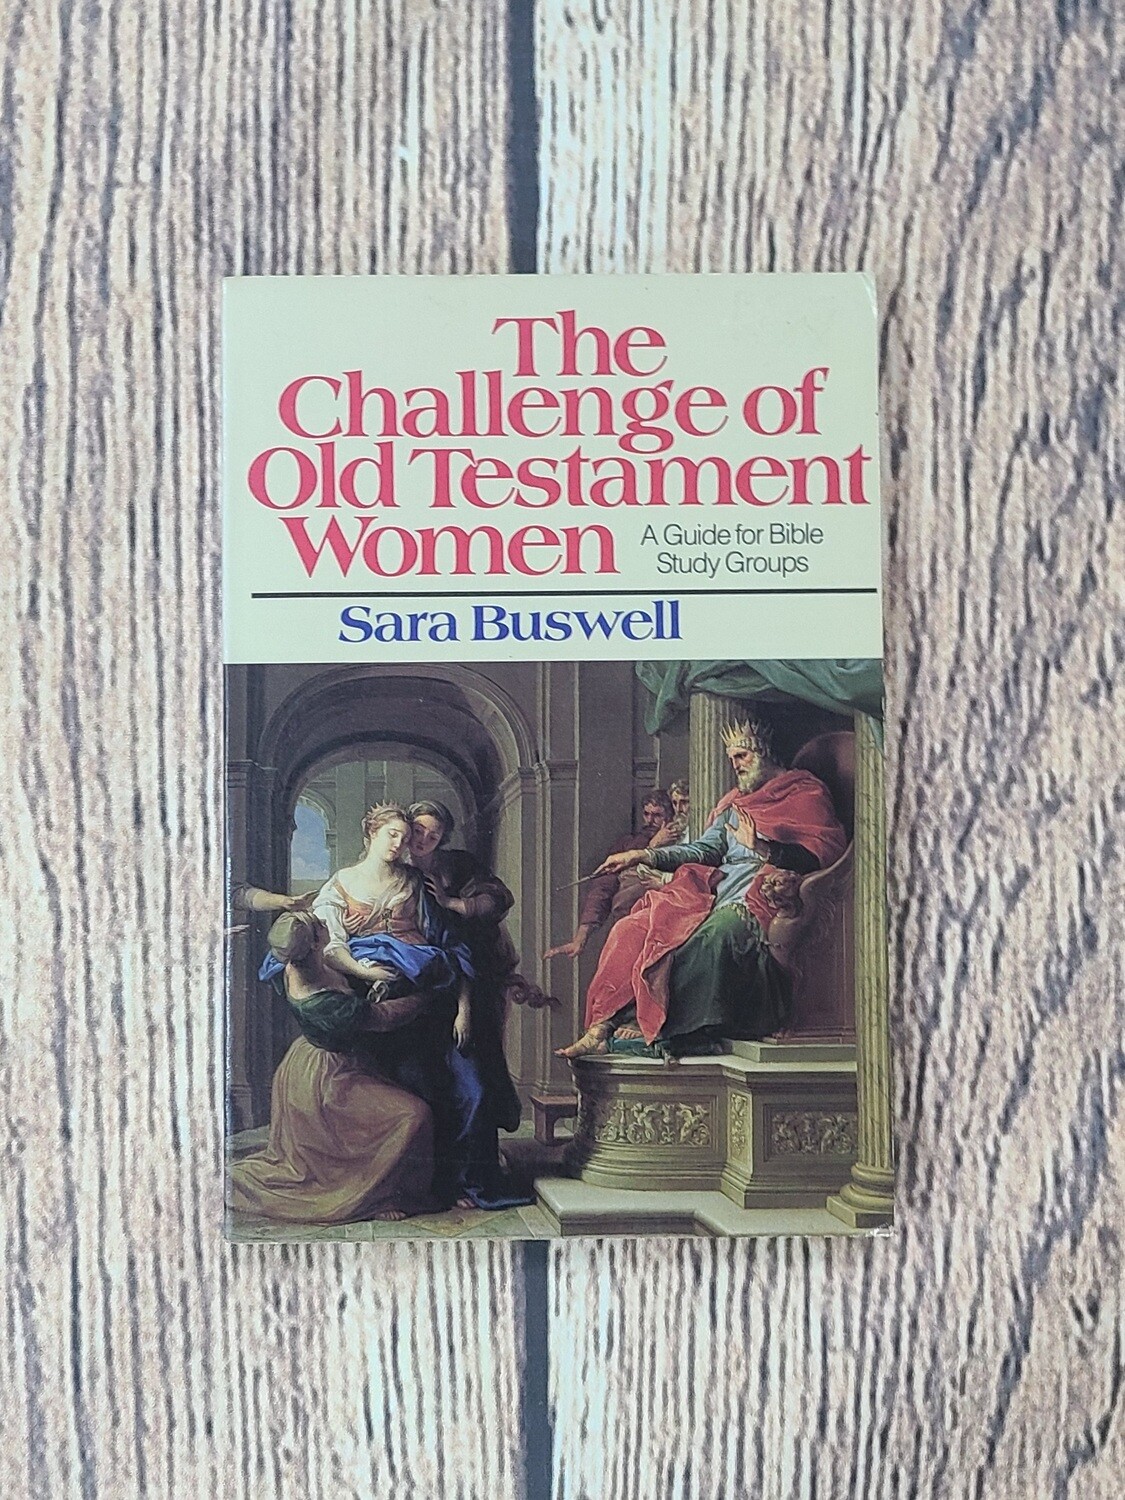 The Challenge of Old Testament Women by Sara Buswell